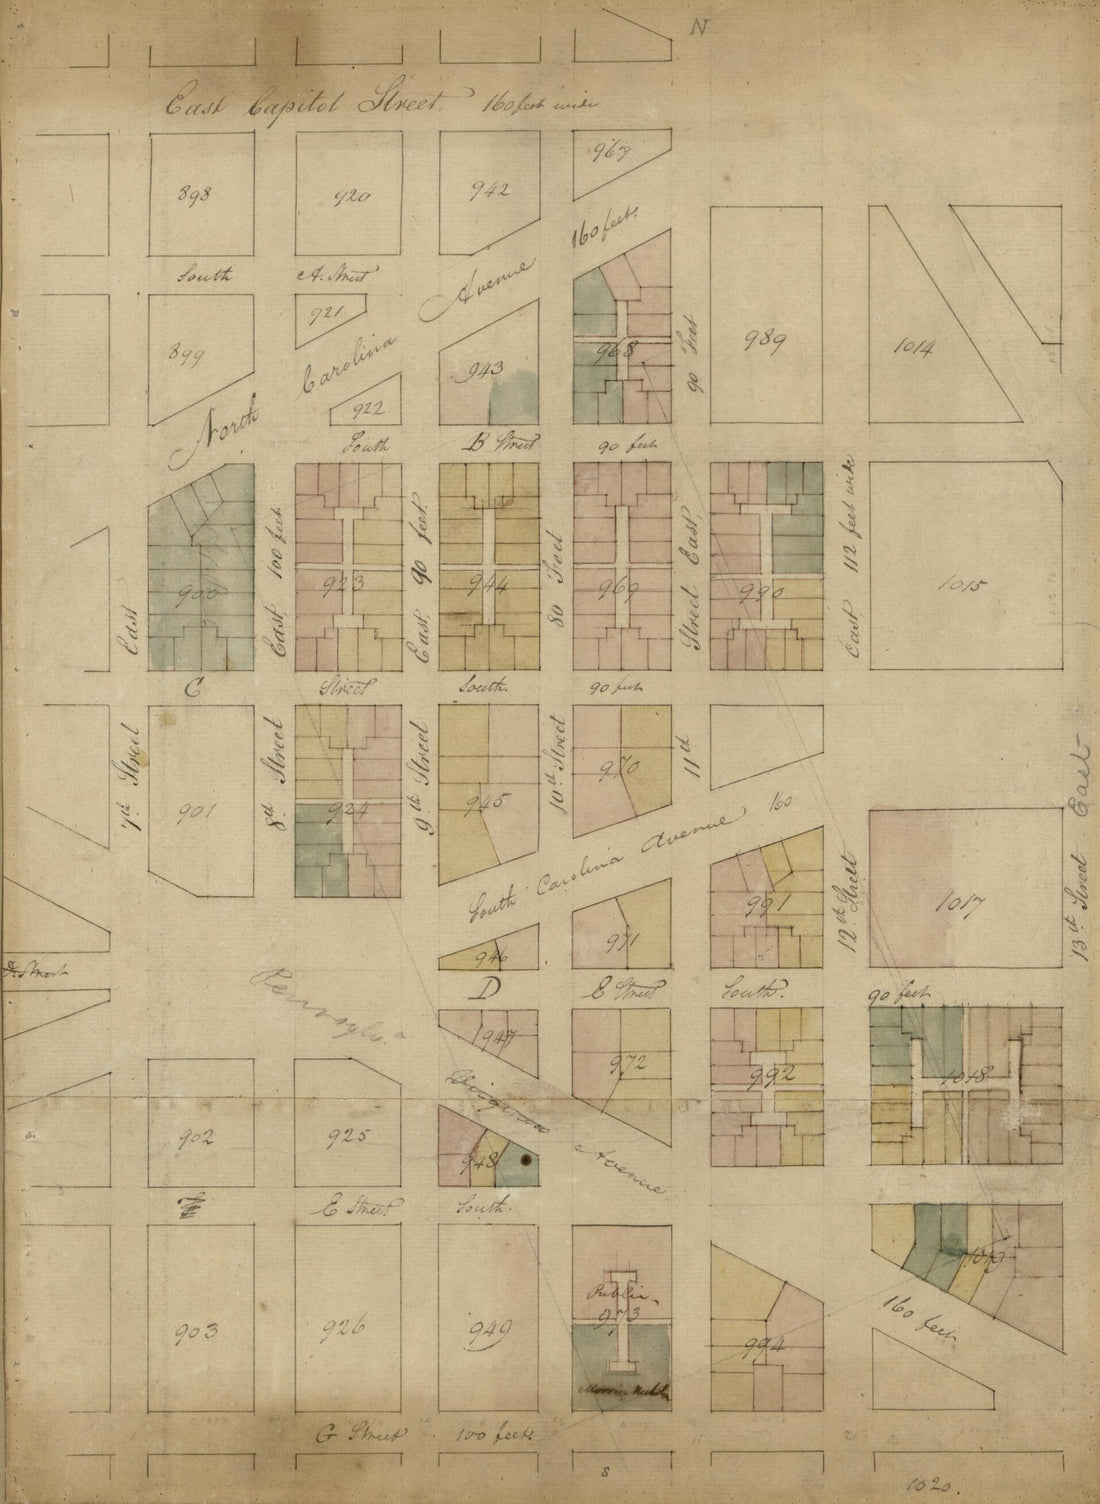 This old map of 5th Plan, from 7th East to 13th Street and G Street South to East Capitol Street : S.E. Washington D.C. from 1794 was created by  Association of the Oldest Inhabitants of the District of Columbia, Henry C. Gauss, Rt. (Robert) King in 1794